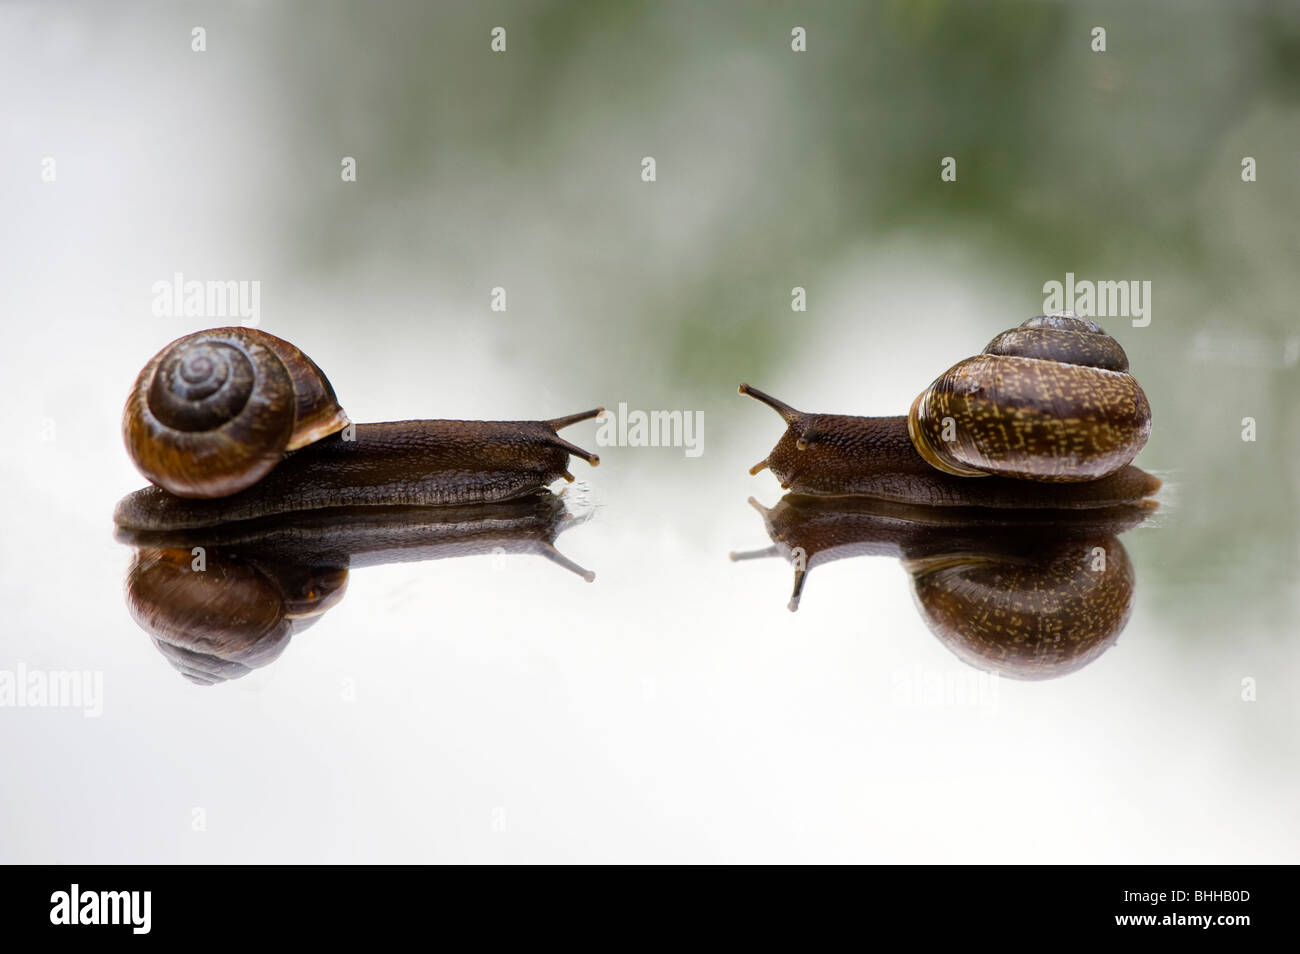 Snails on a mirror, close-up, Sweden. Stock Photo